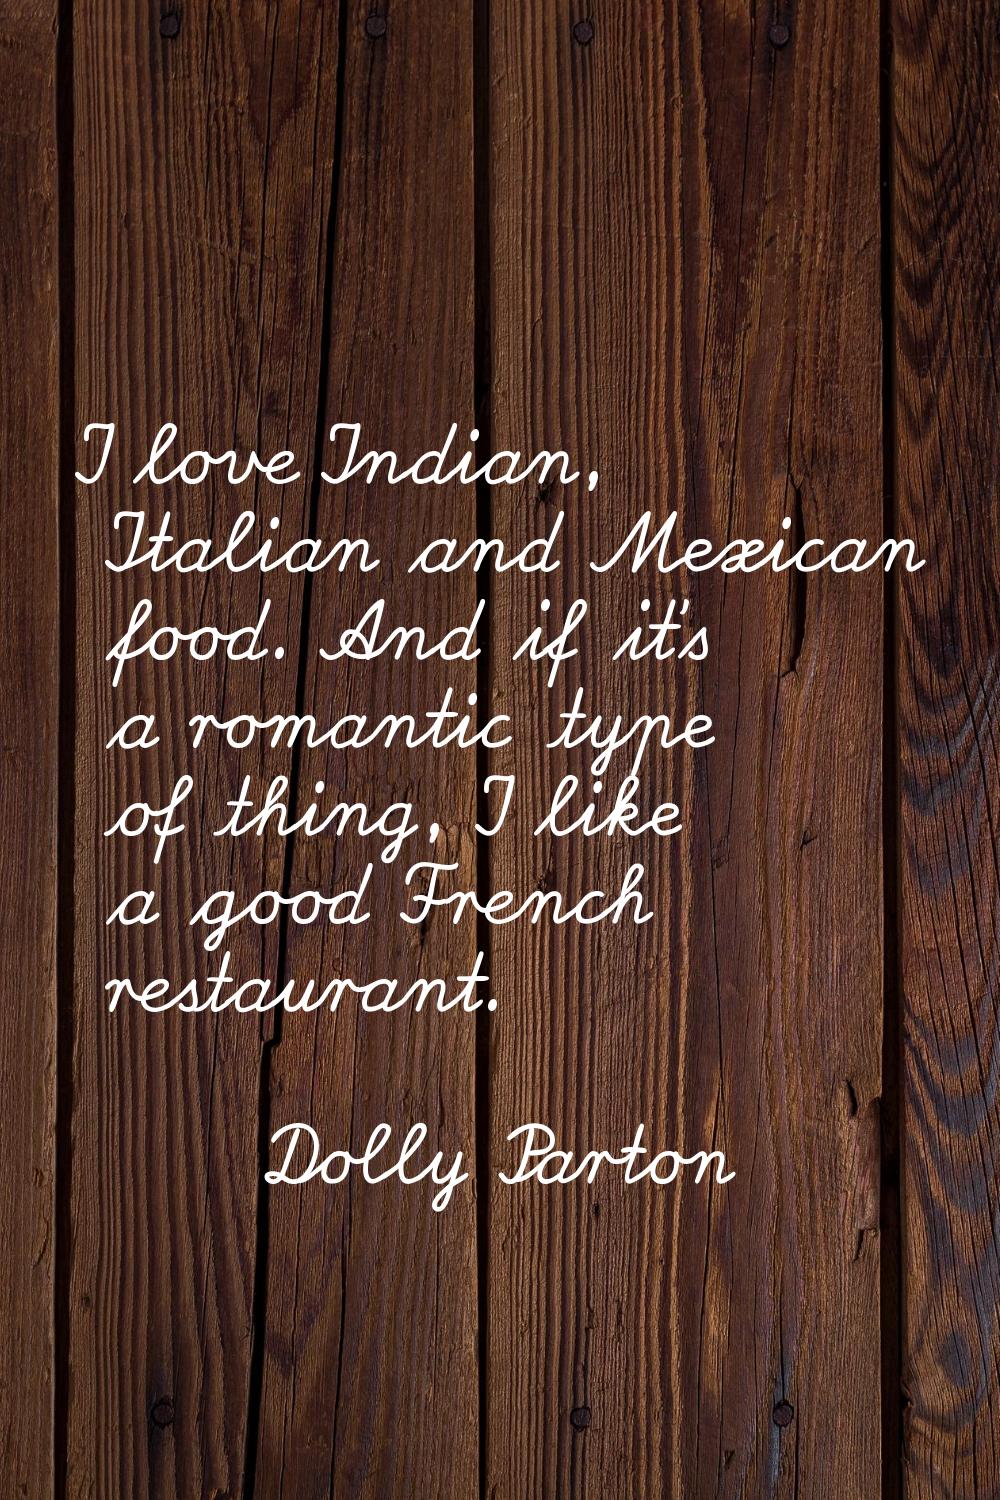 I love Indian, Italian and Mexican food. And if it's a romantic type of thing, I like a good French